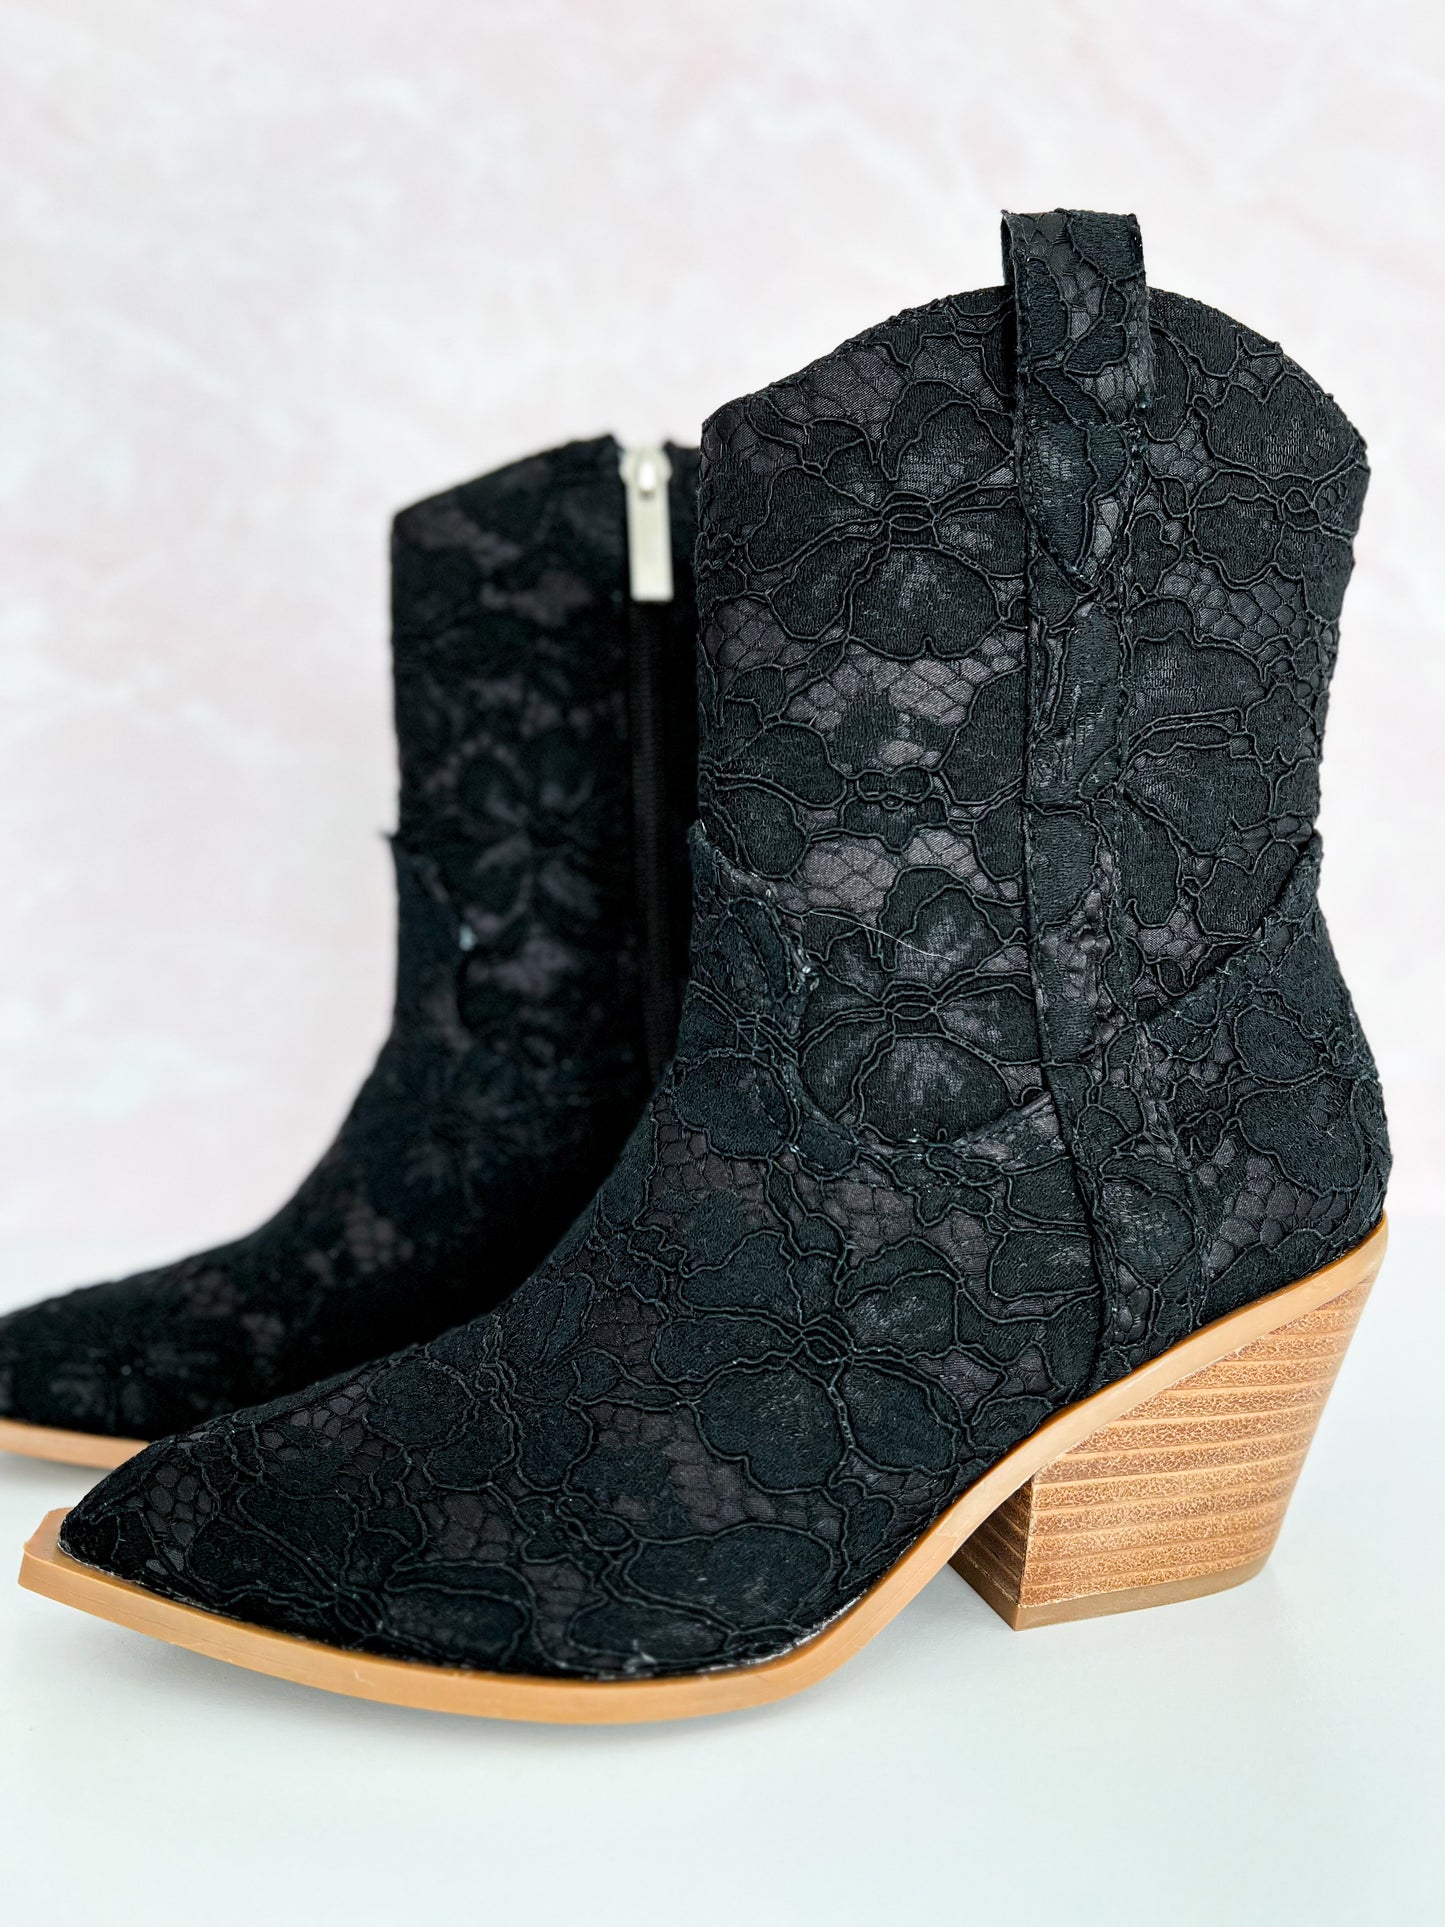 Corky's Rowdy Boot - Black Lace